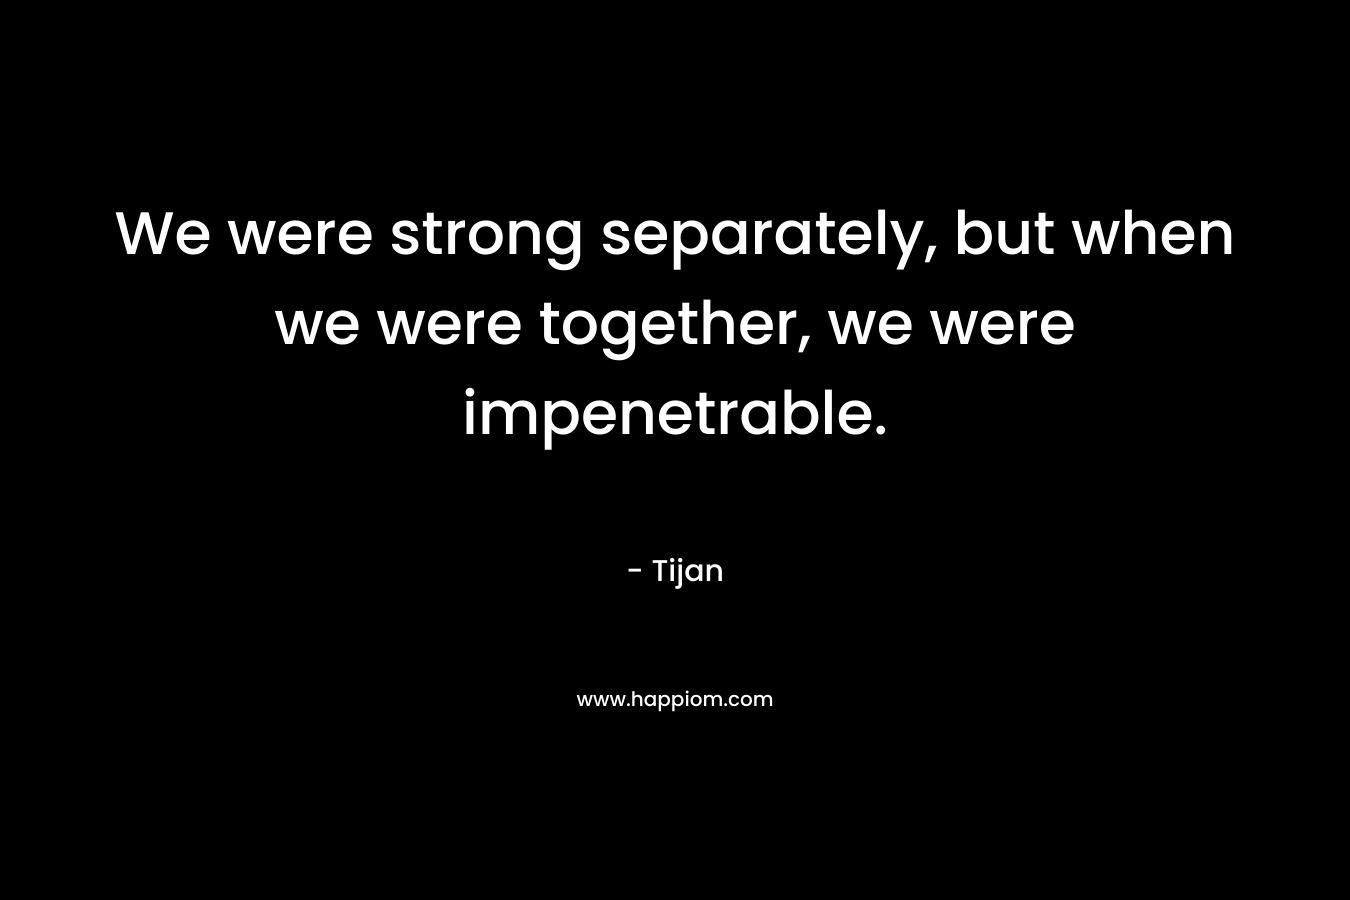 We were strong separately, but when we were together, we were impenetrable. – Tijan